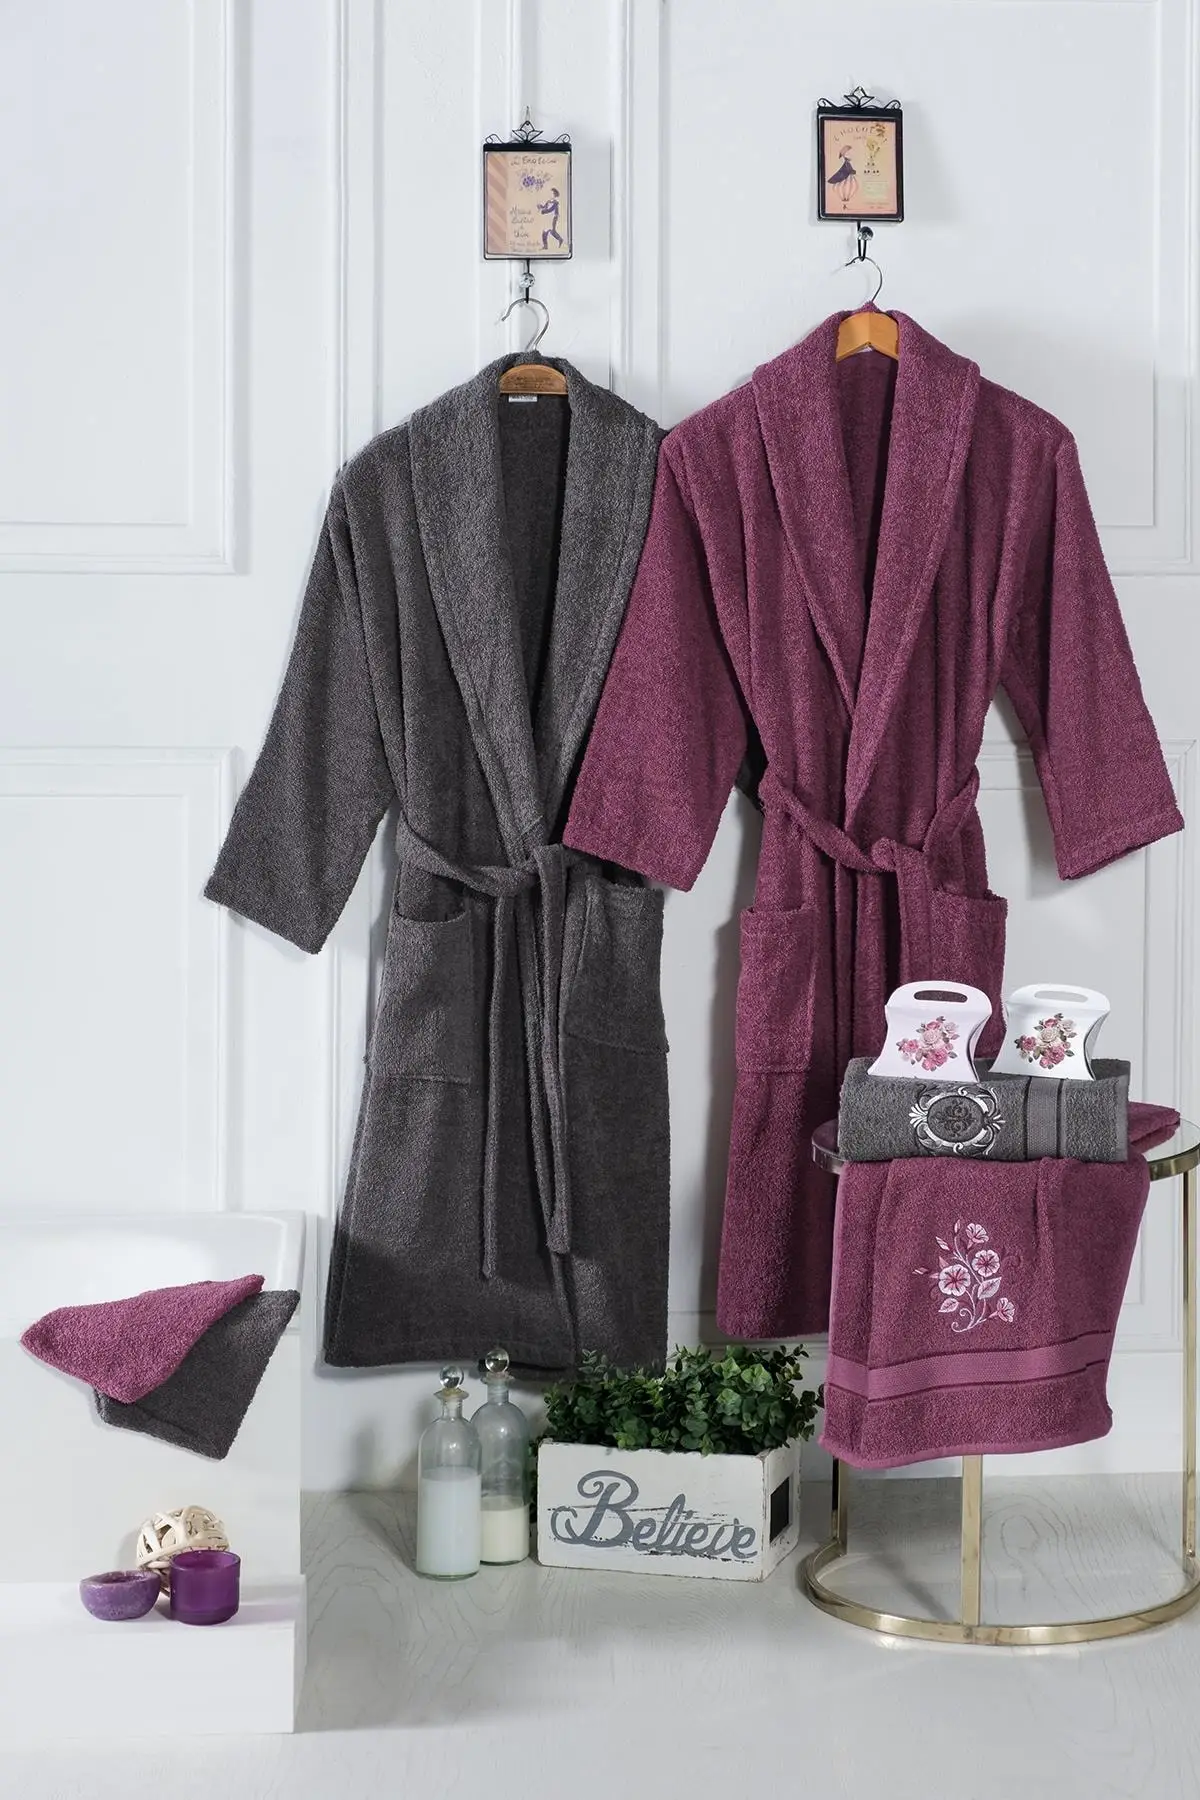 8 Piece Embroidered Bathrobe Set - Bath Towels, Hotel Bathrobes, Hand and Face Towels, 100% Cotton, Bath Products